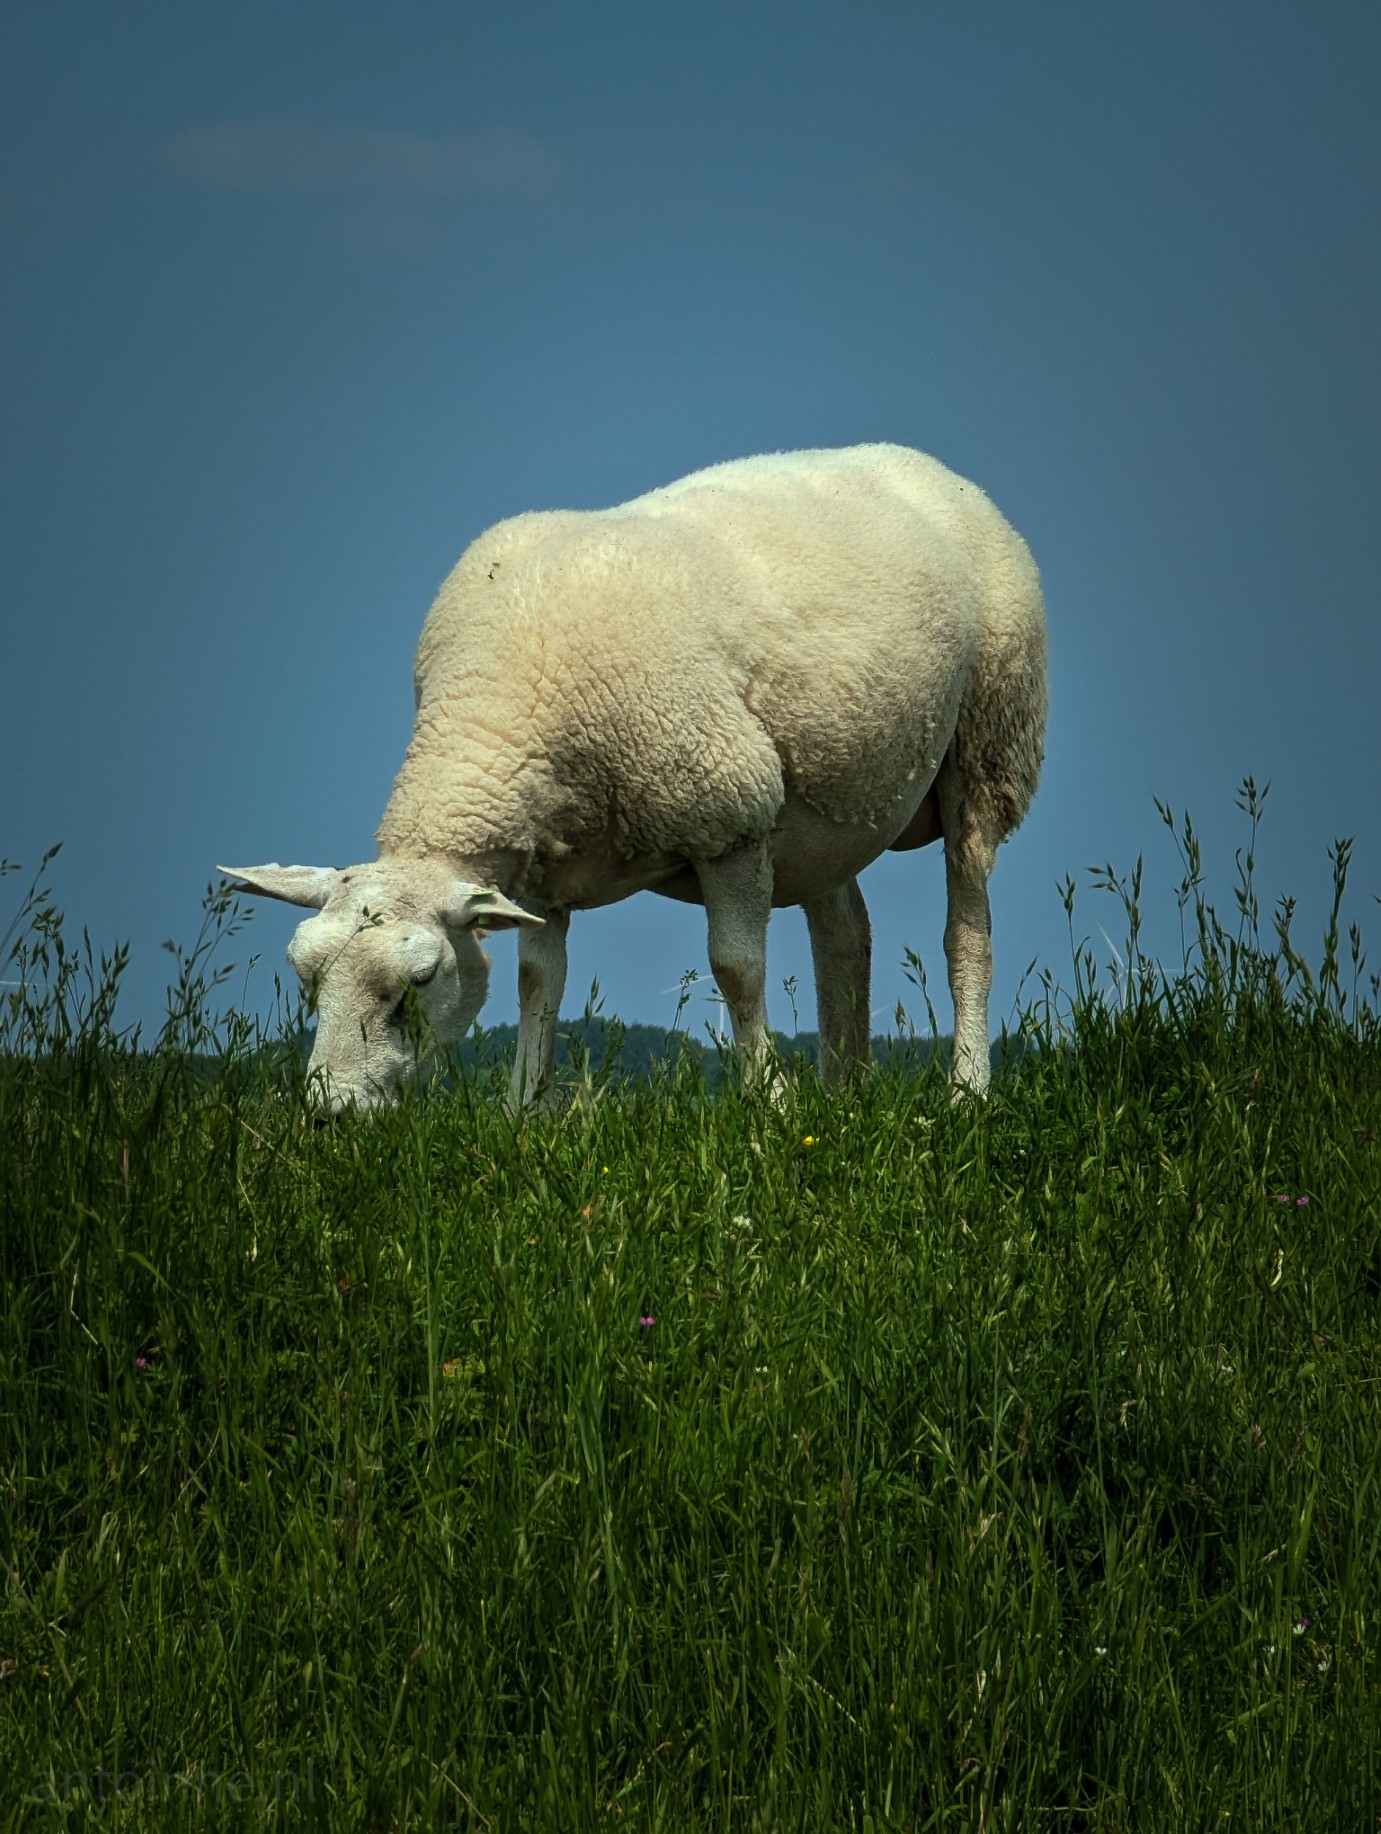 A grazing sheep in a green meadow.